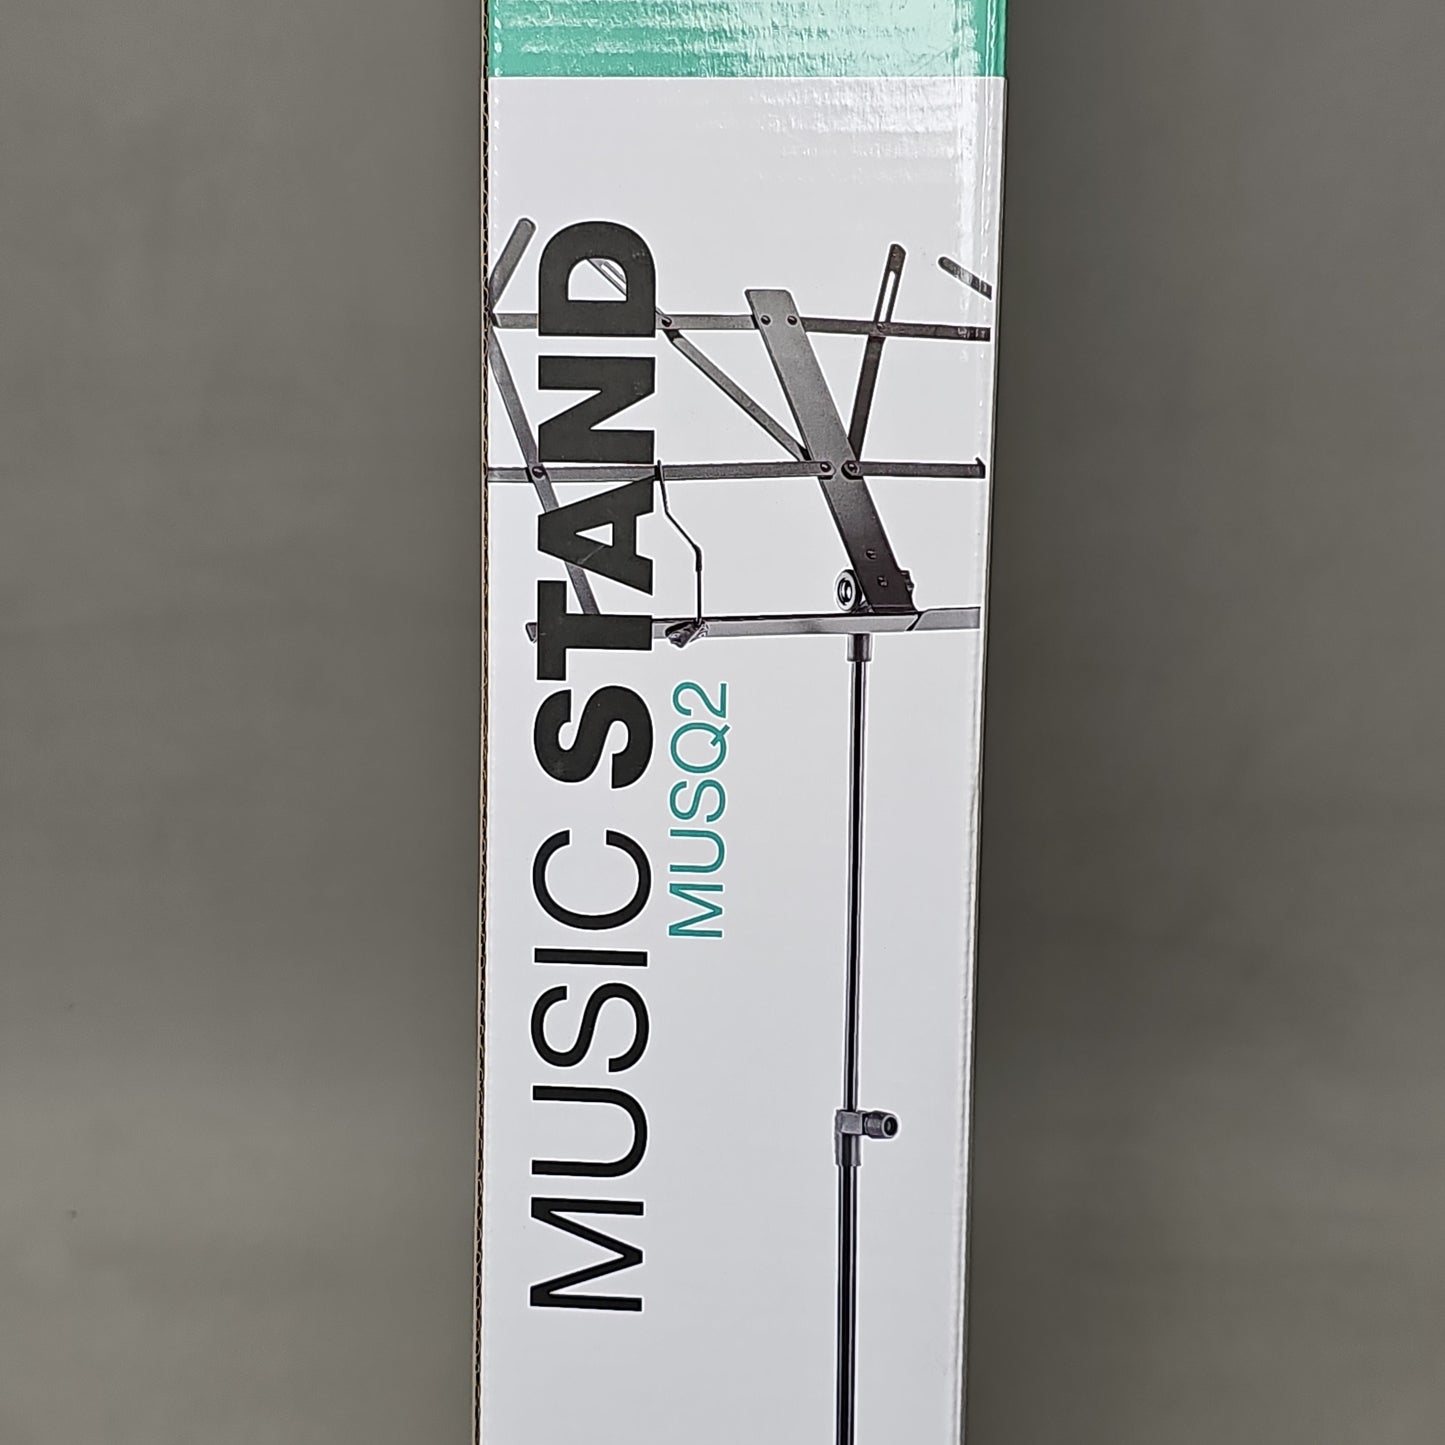 STAGG Economy Foldable Music Stand MUSQ2 Black (New)